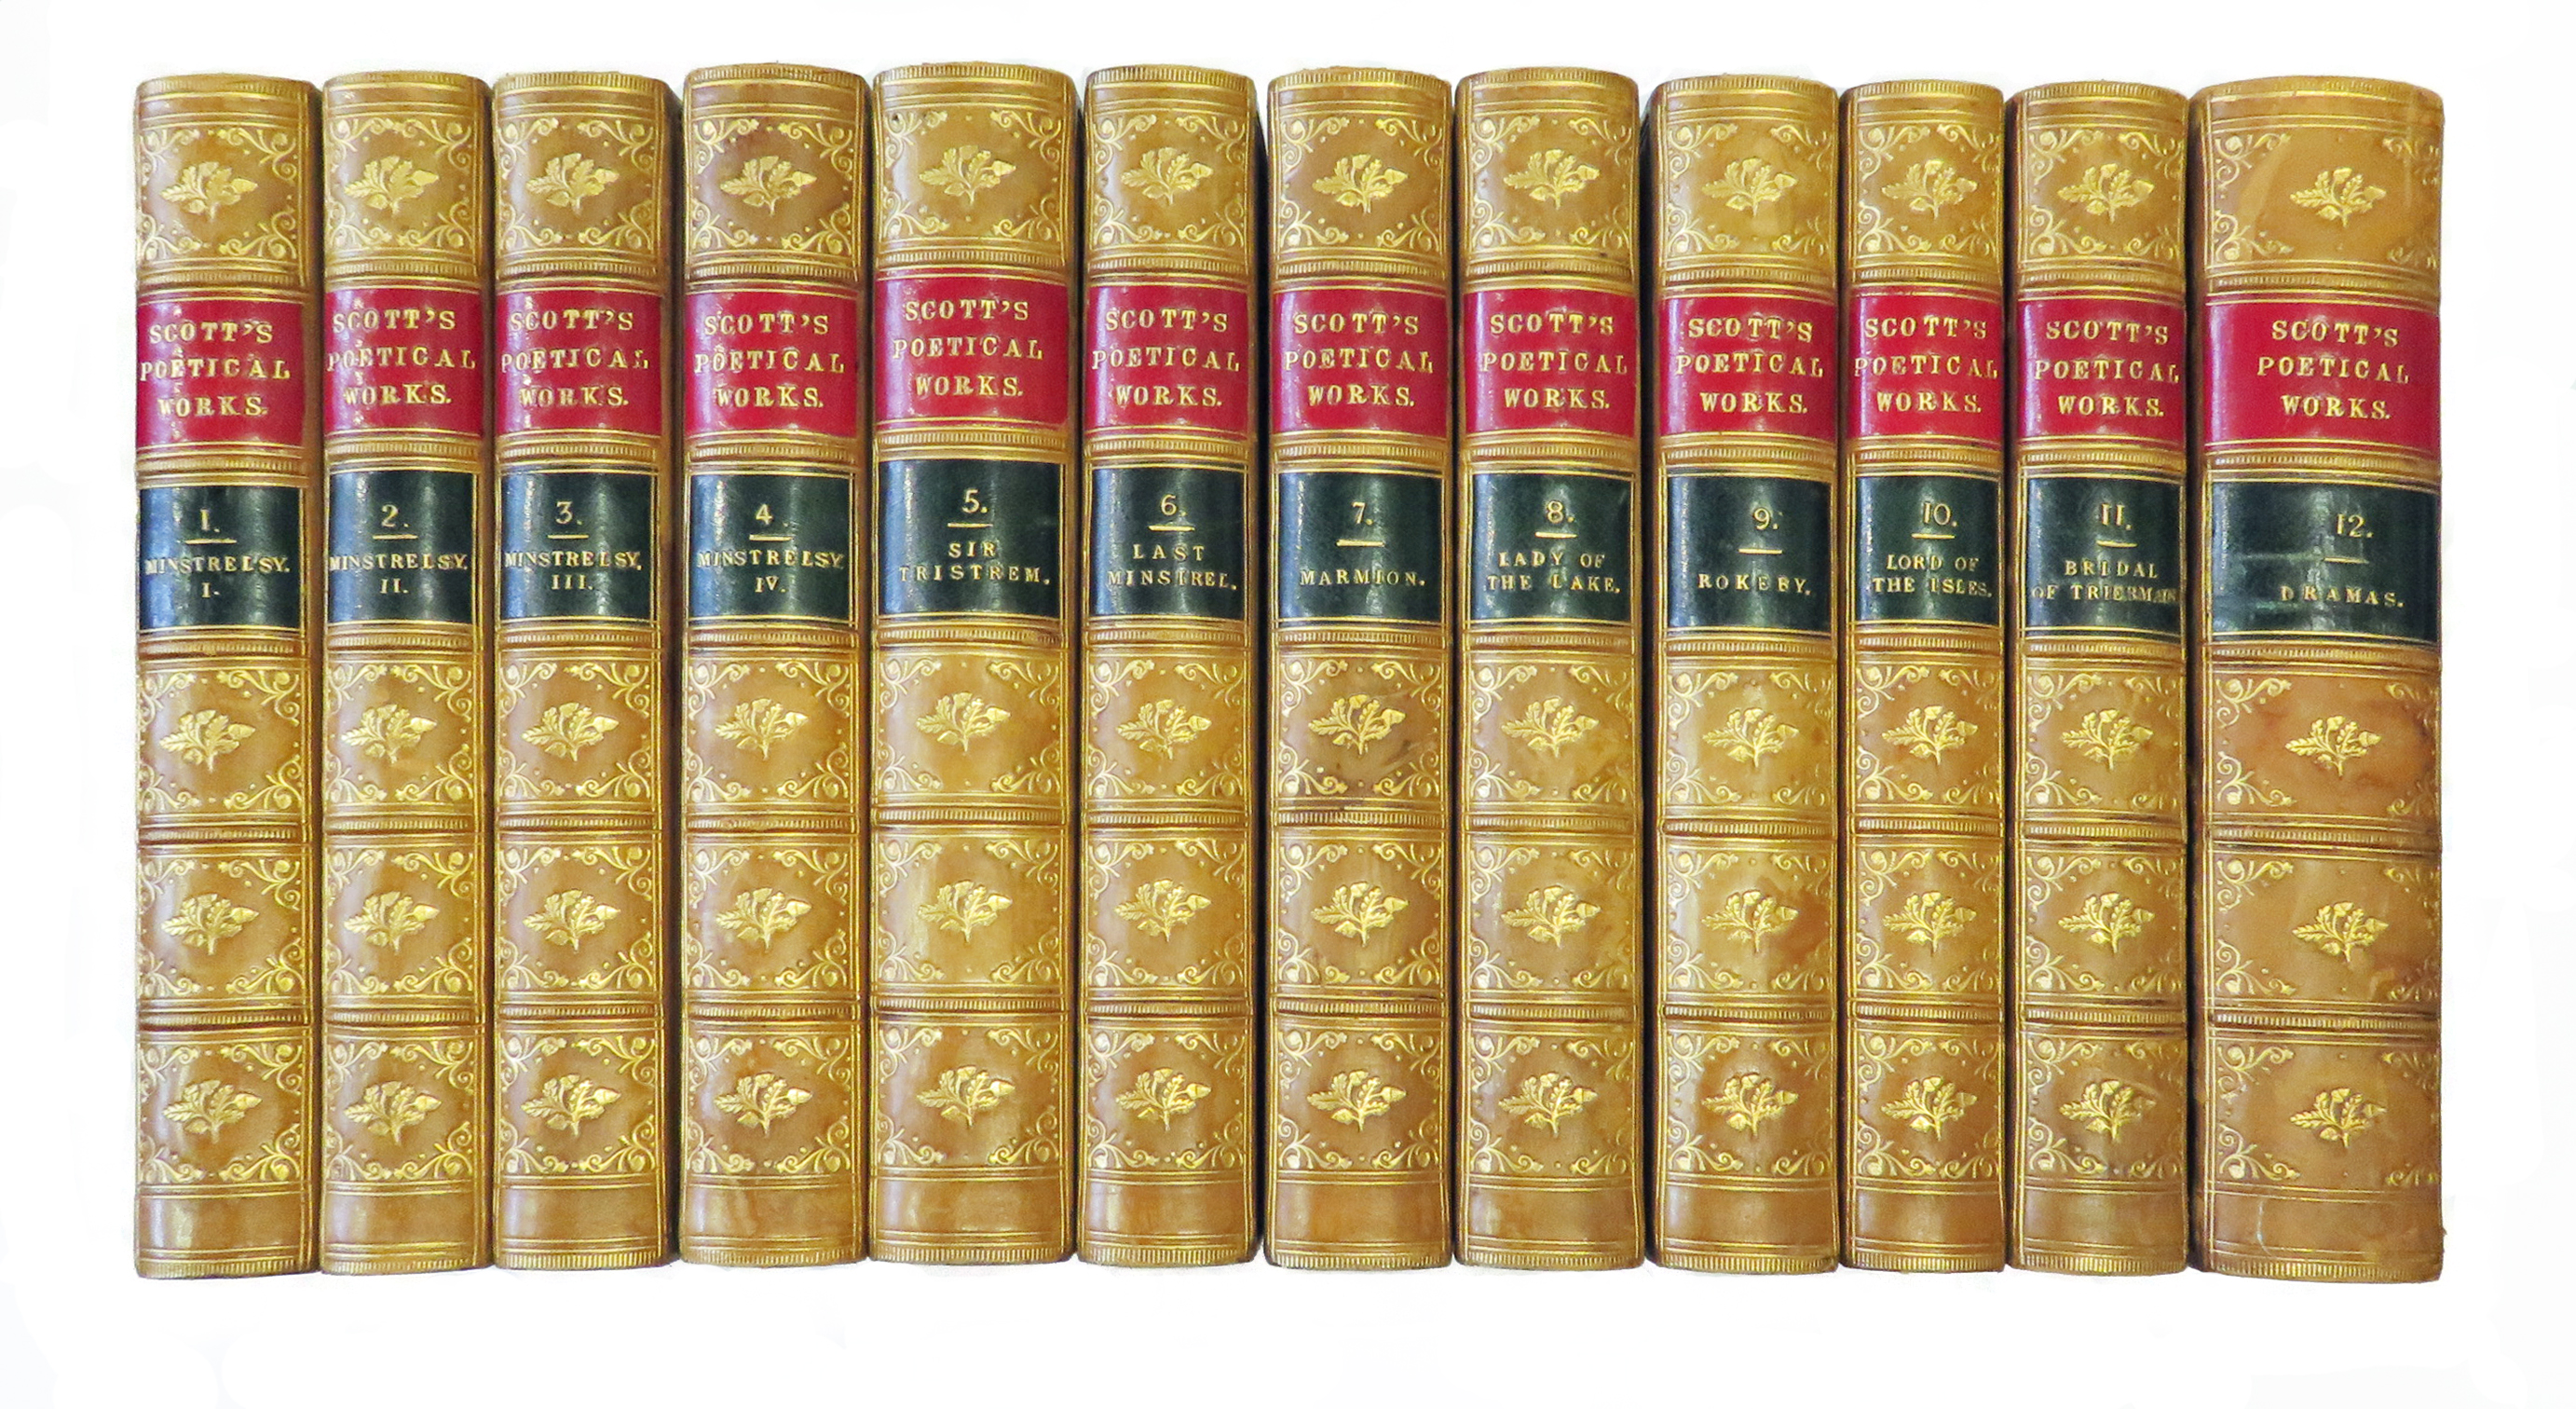 The Poetical Works of Sir Walter Scott, Bart. In Twelve Finely Bound Volumes.